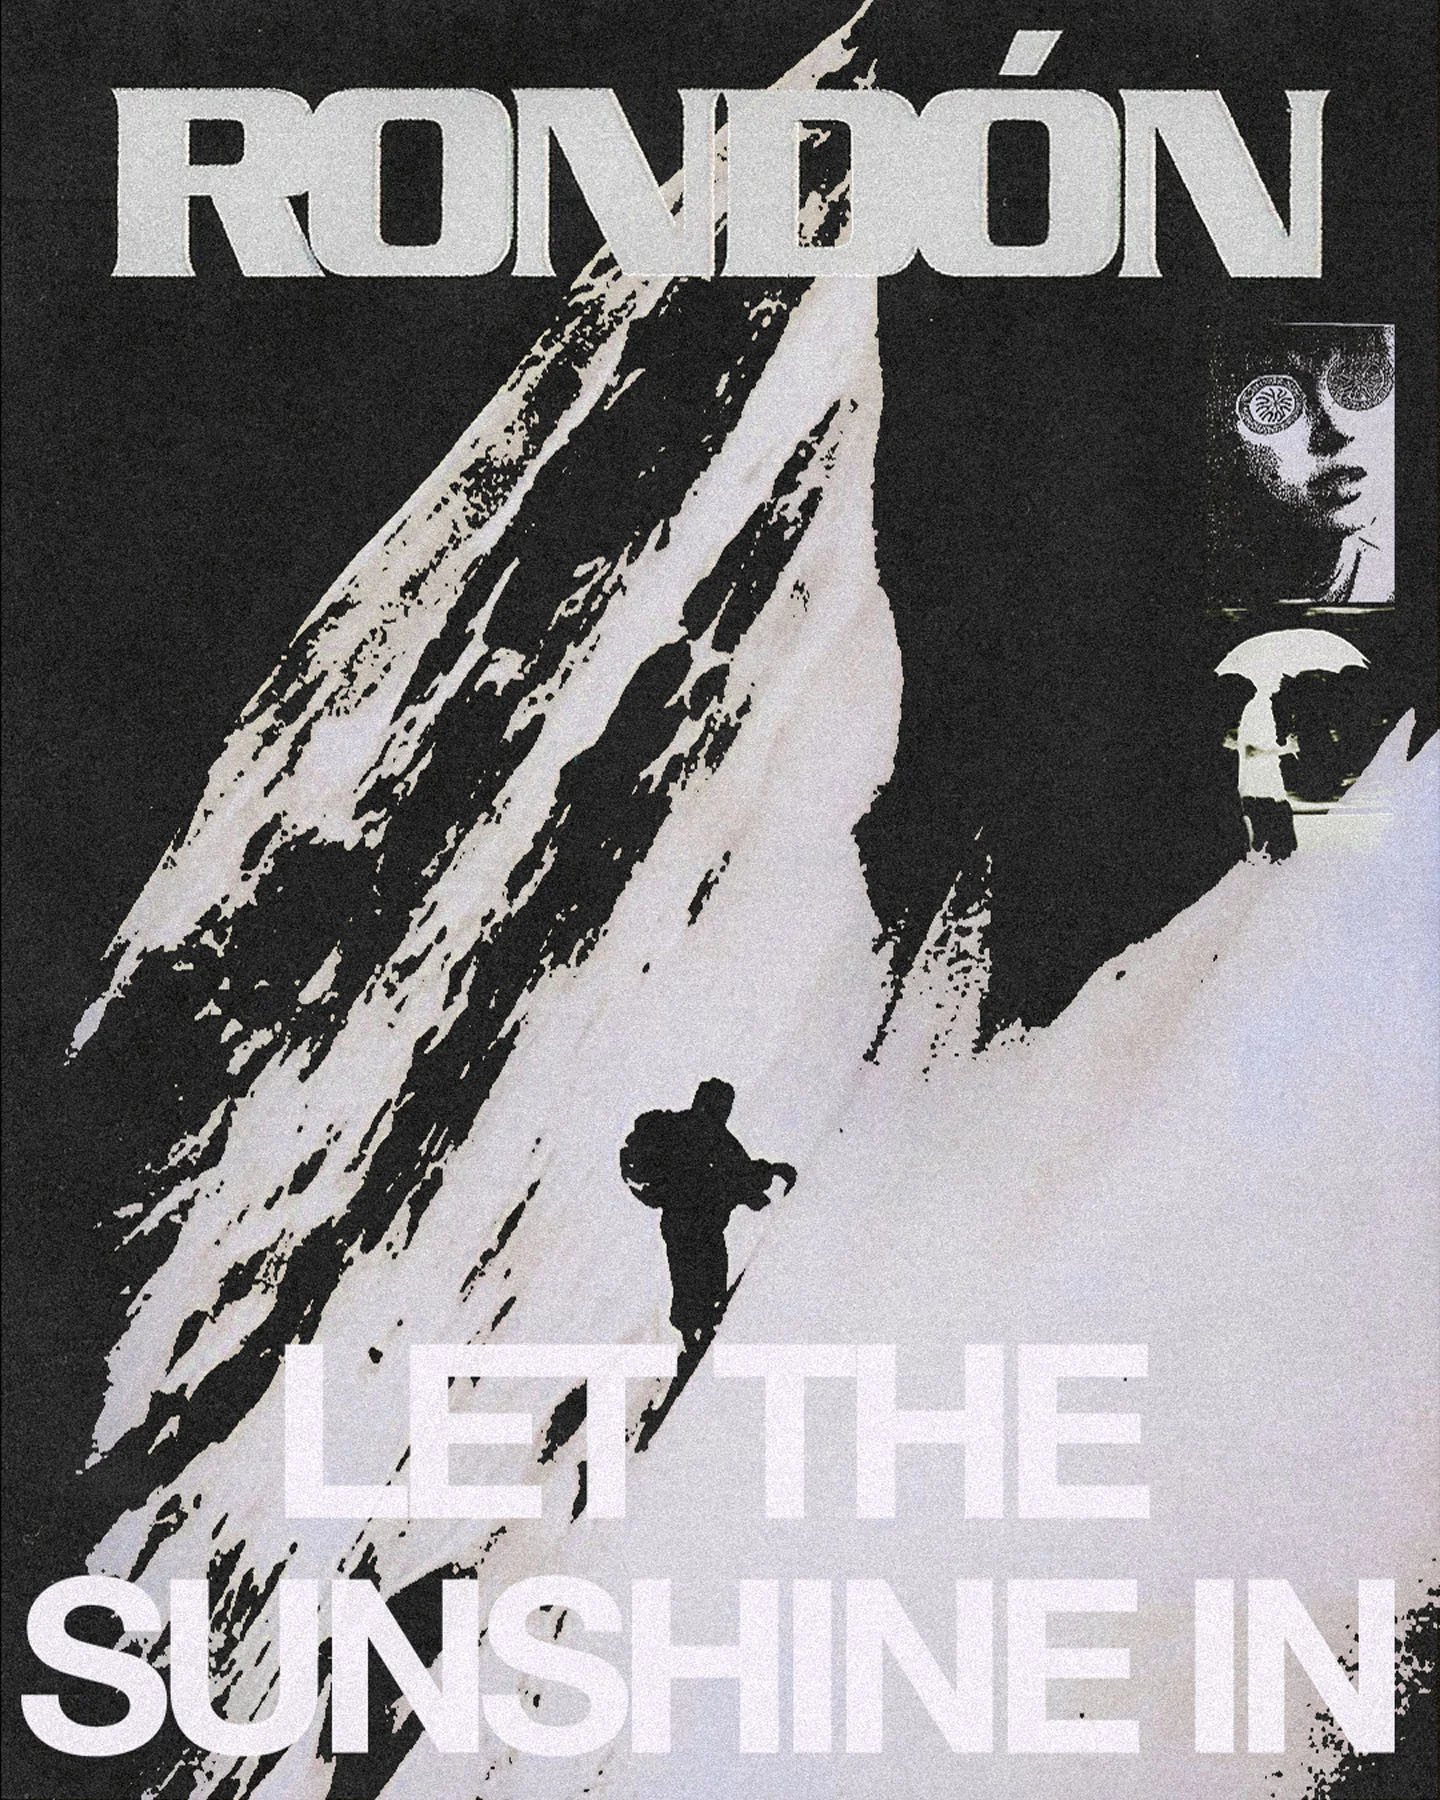 A poster featuring the text "RONDÓN LET THE SUNSHINE IN" in bold, white letters against a dark background. Features a silhouette of a person climbing a mountain, and 2 smaller images on the upper right, a surreal face with circular, reflective glasses on the right, and the silhouette of a person walking while holding an umbrella.